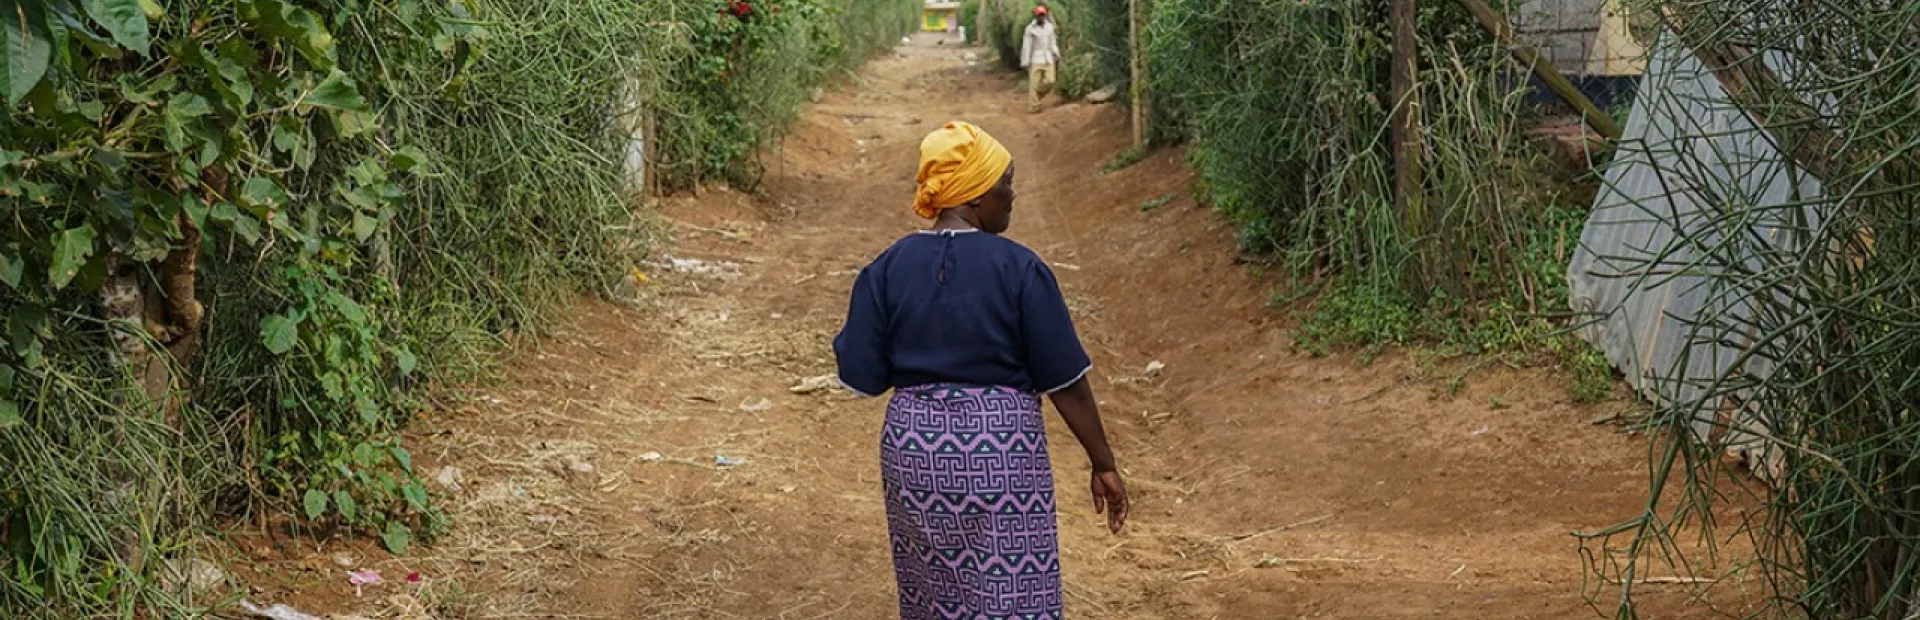 Patient in rural Kenya walks to a clinic